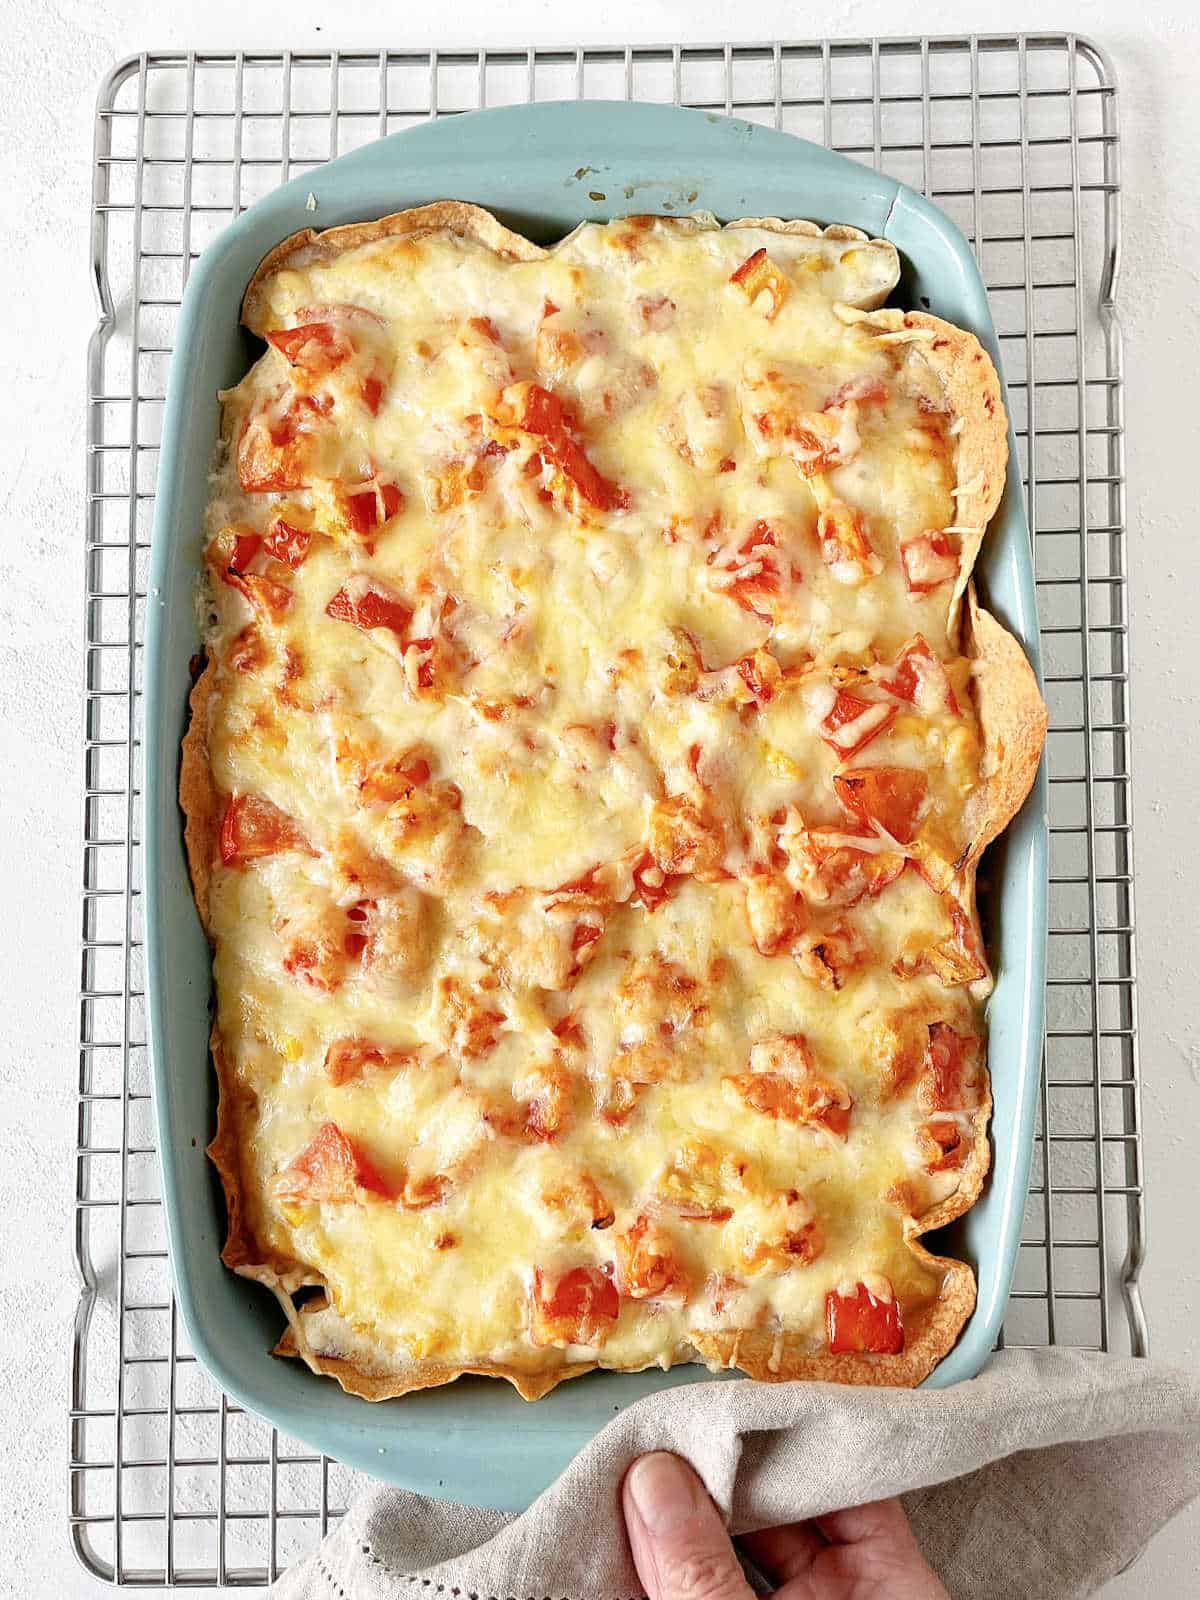 Baked cheese and tomato topped casserole in blue dish on wire rack.